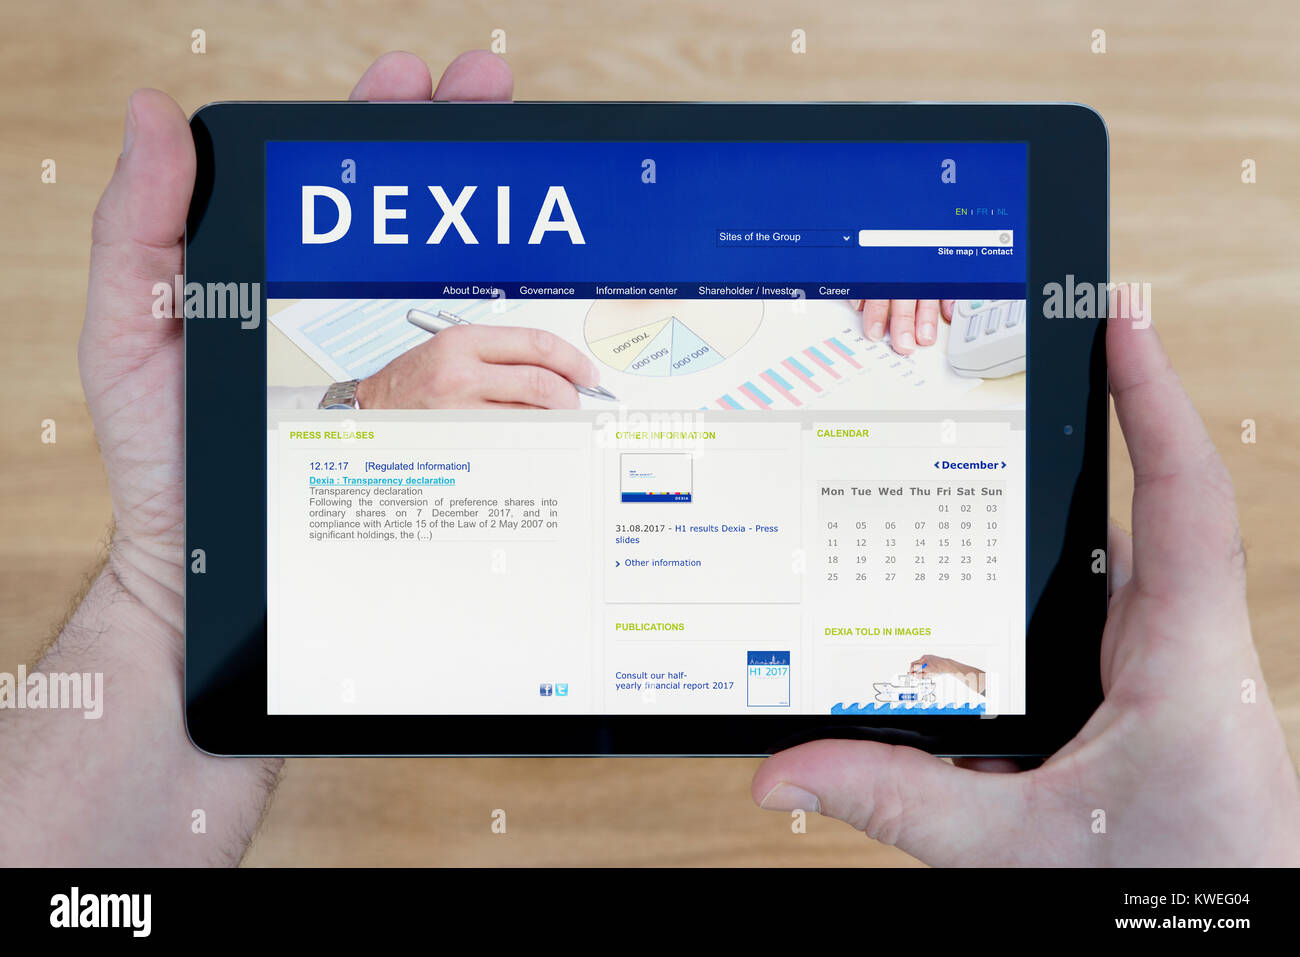 A man looks at the Dexia Bank website on his iPad tablet device, shot against a wooden table top background (Editorial use only) Stock Photo